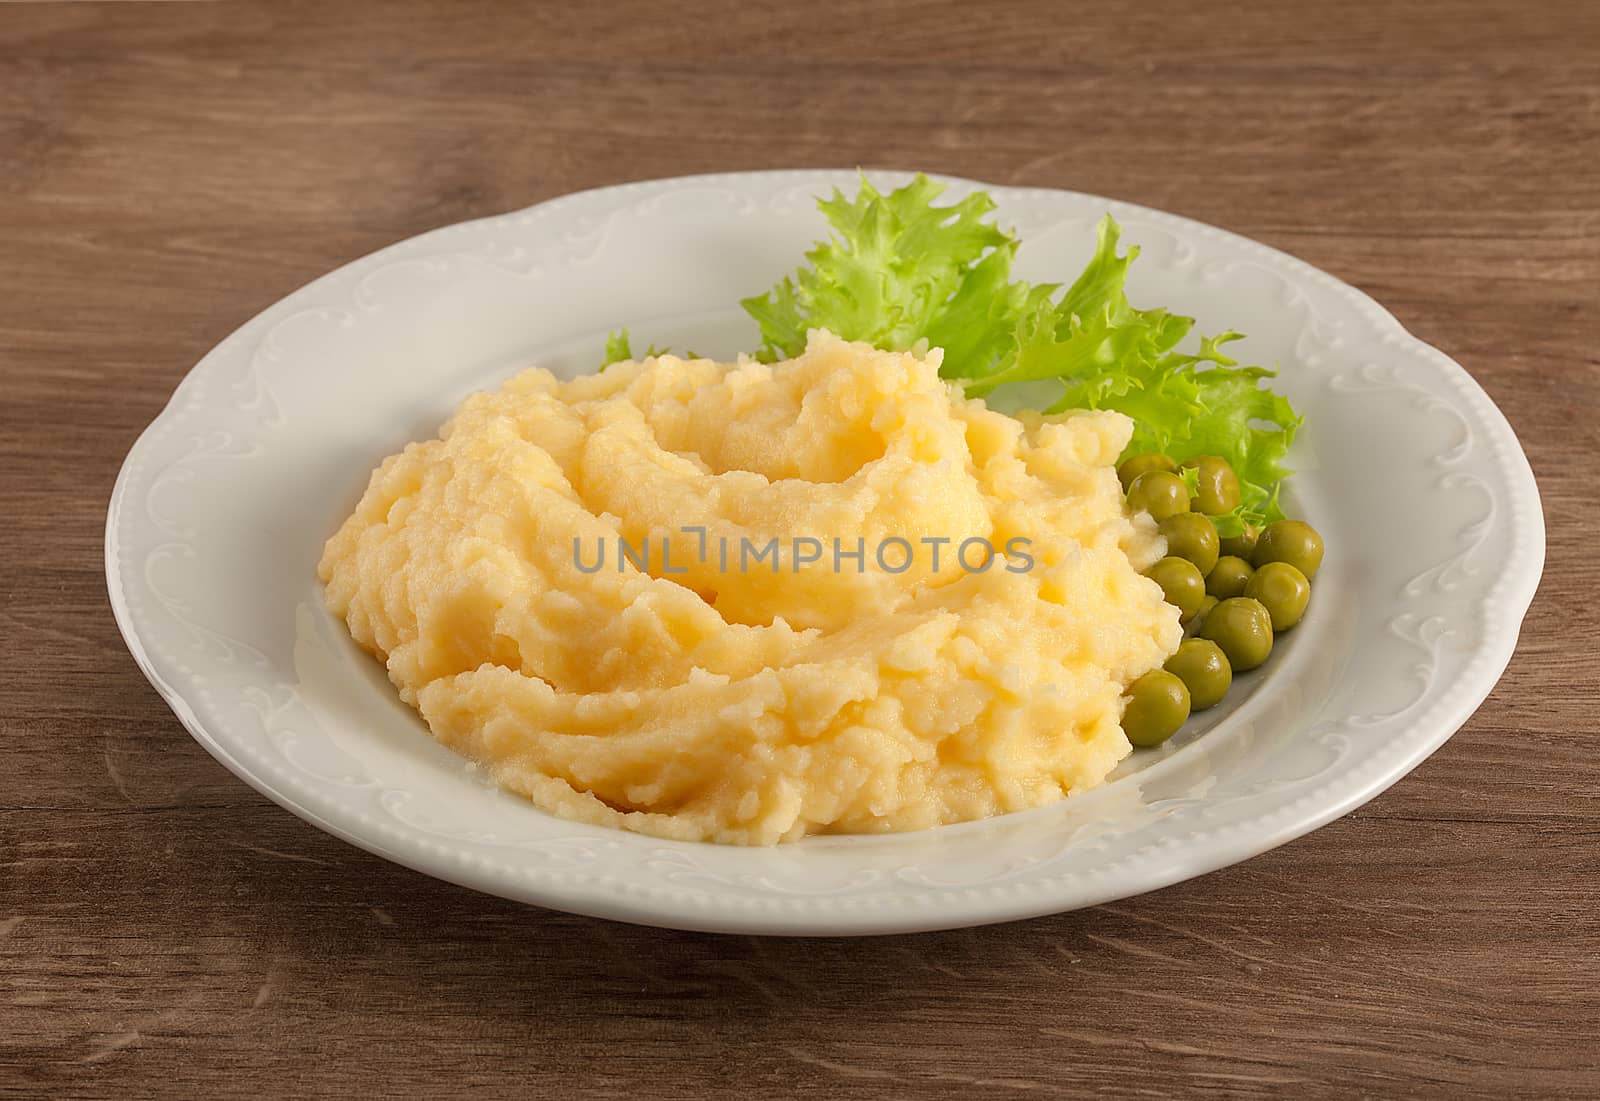 White plate with mashed potatoes, green peas and fresh green lettuce on the wooden table